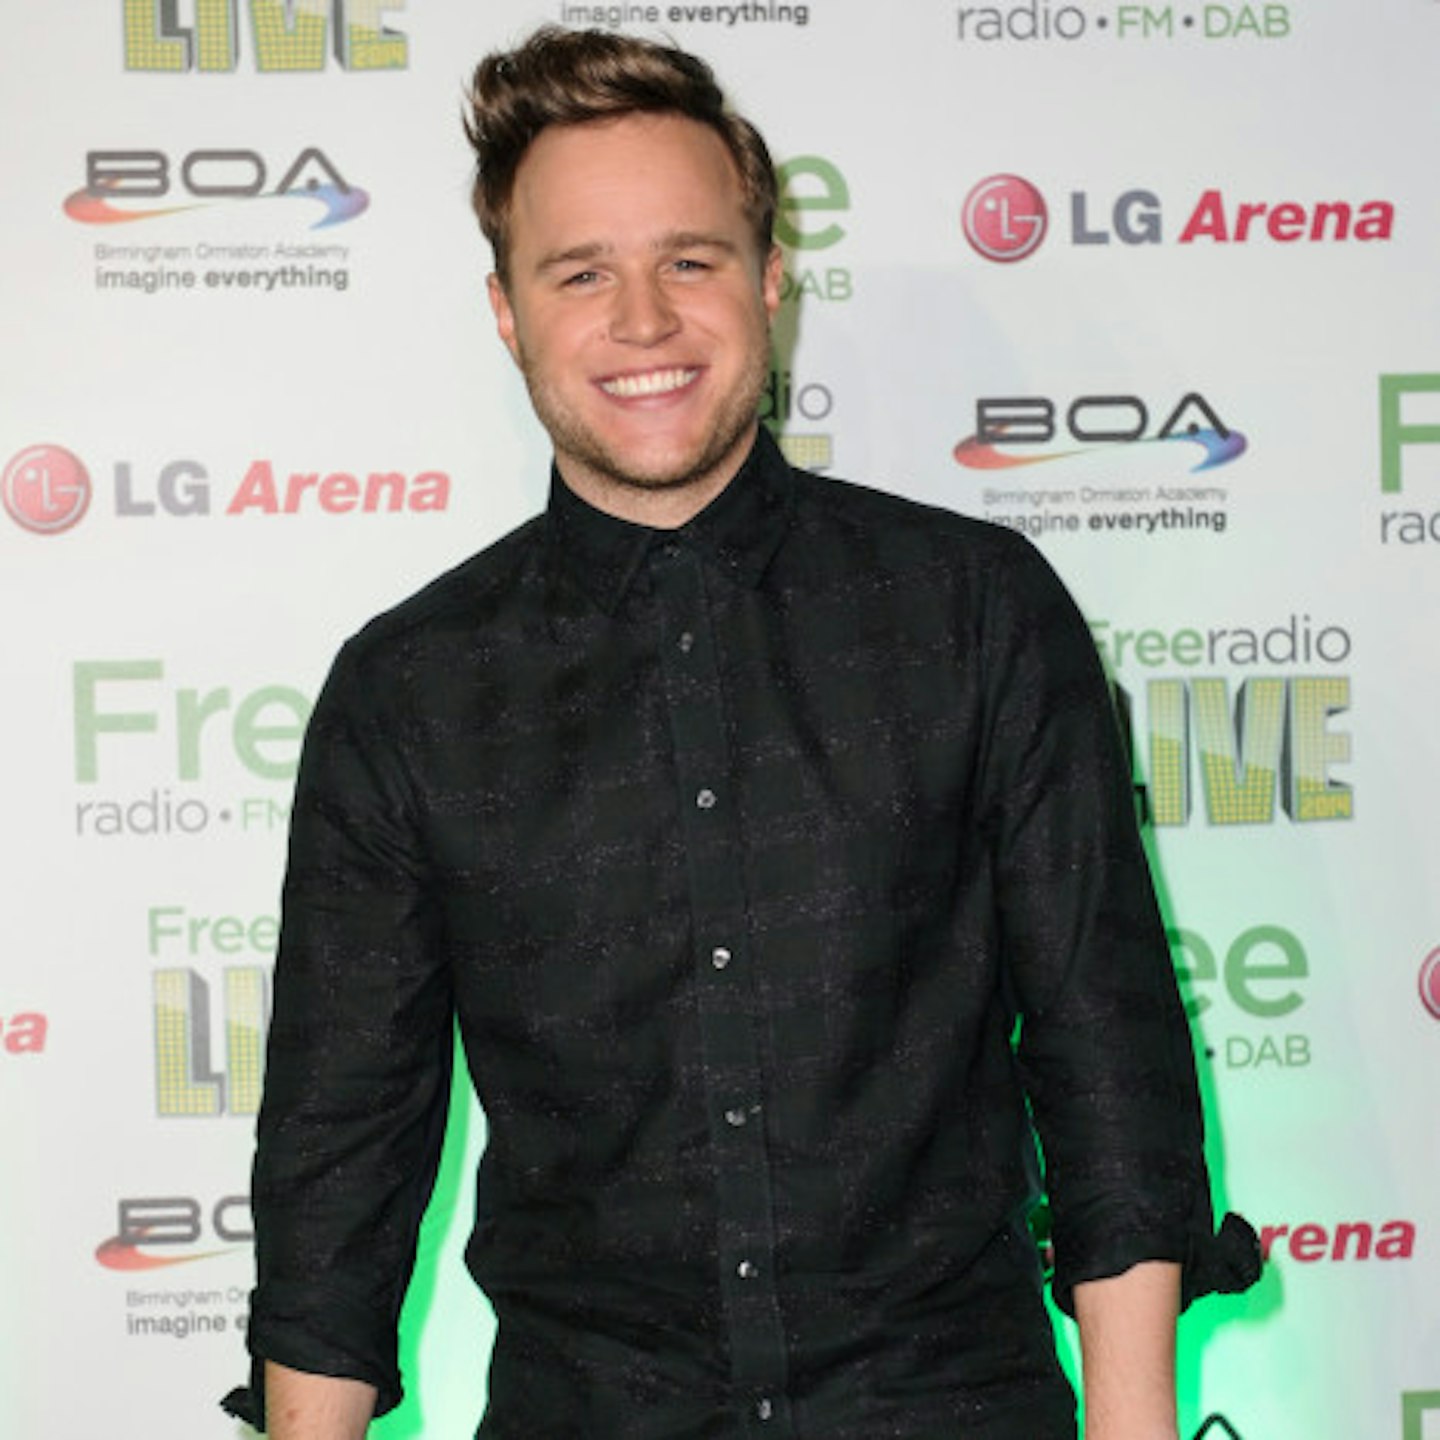 Olly will reportedly replace Dermot as host of the show